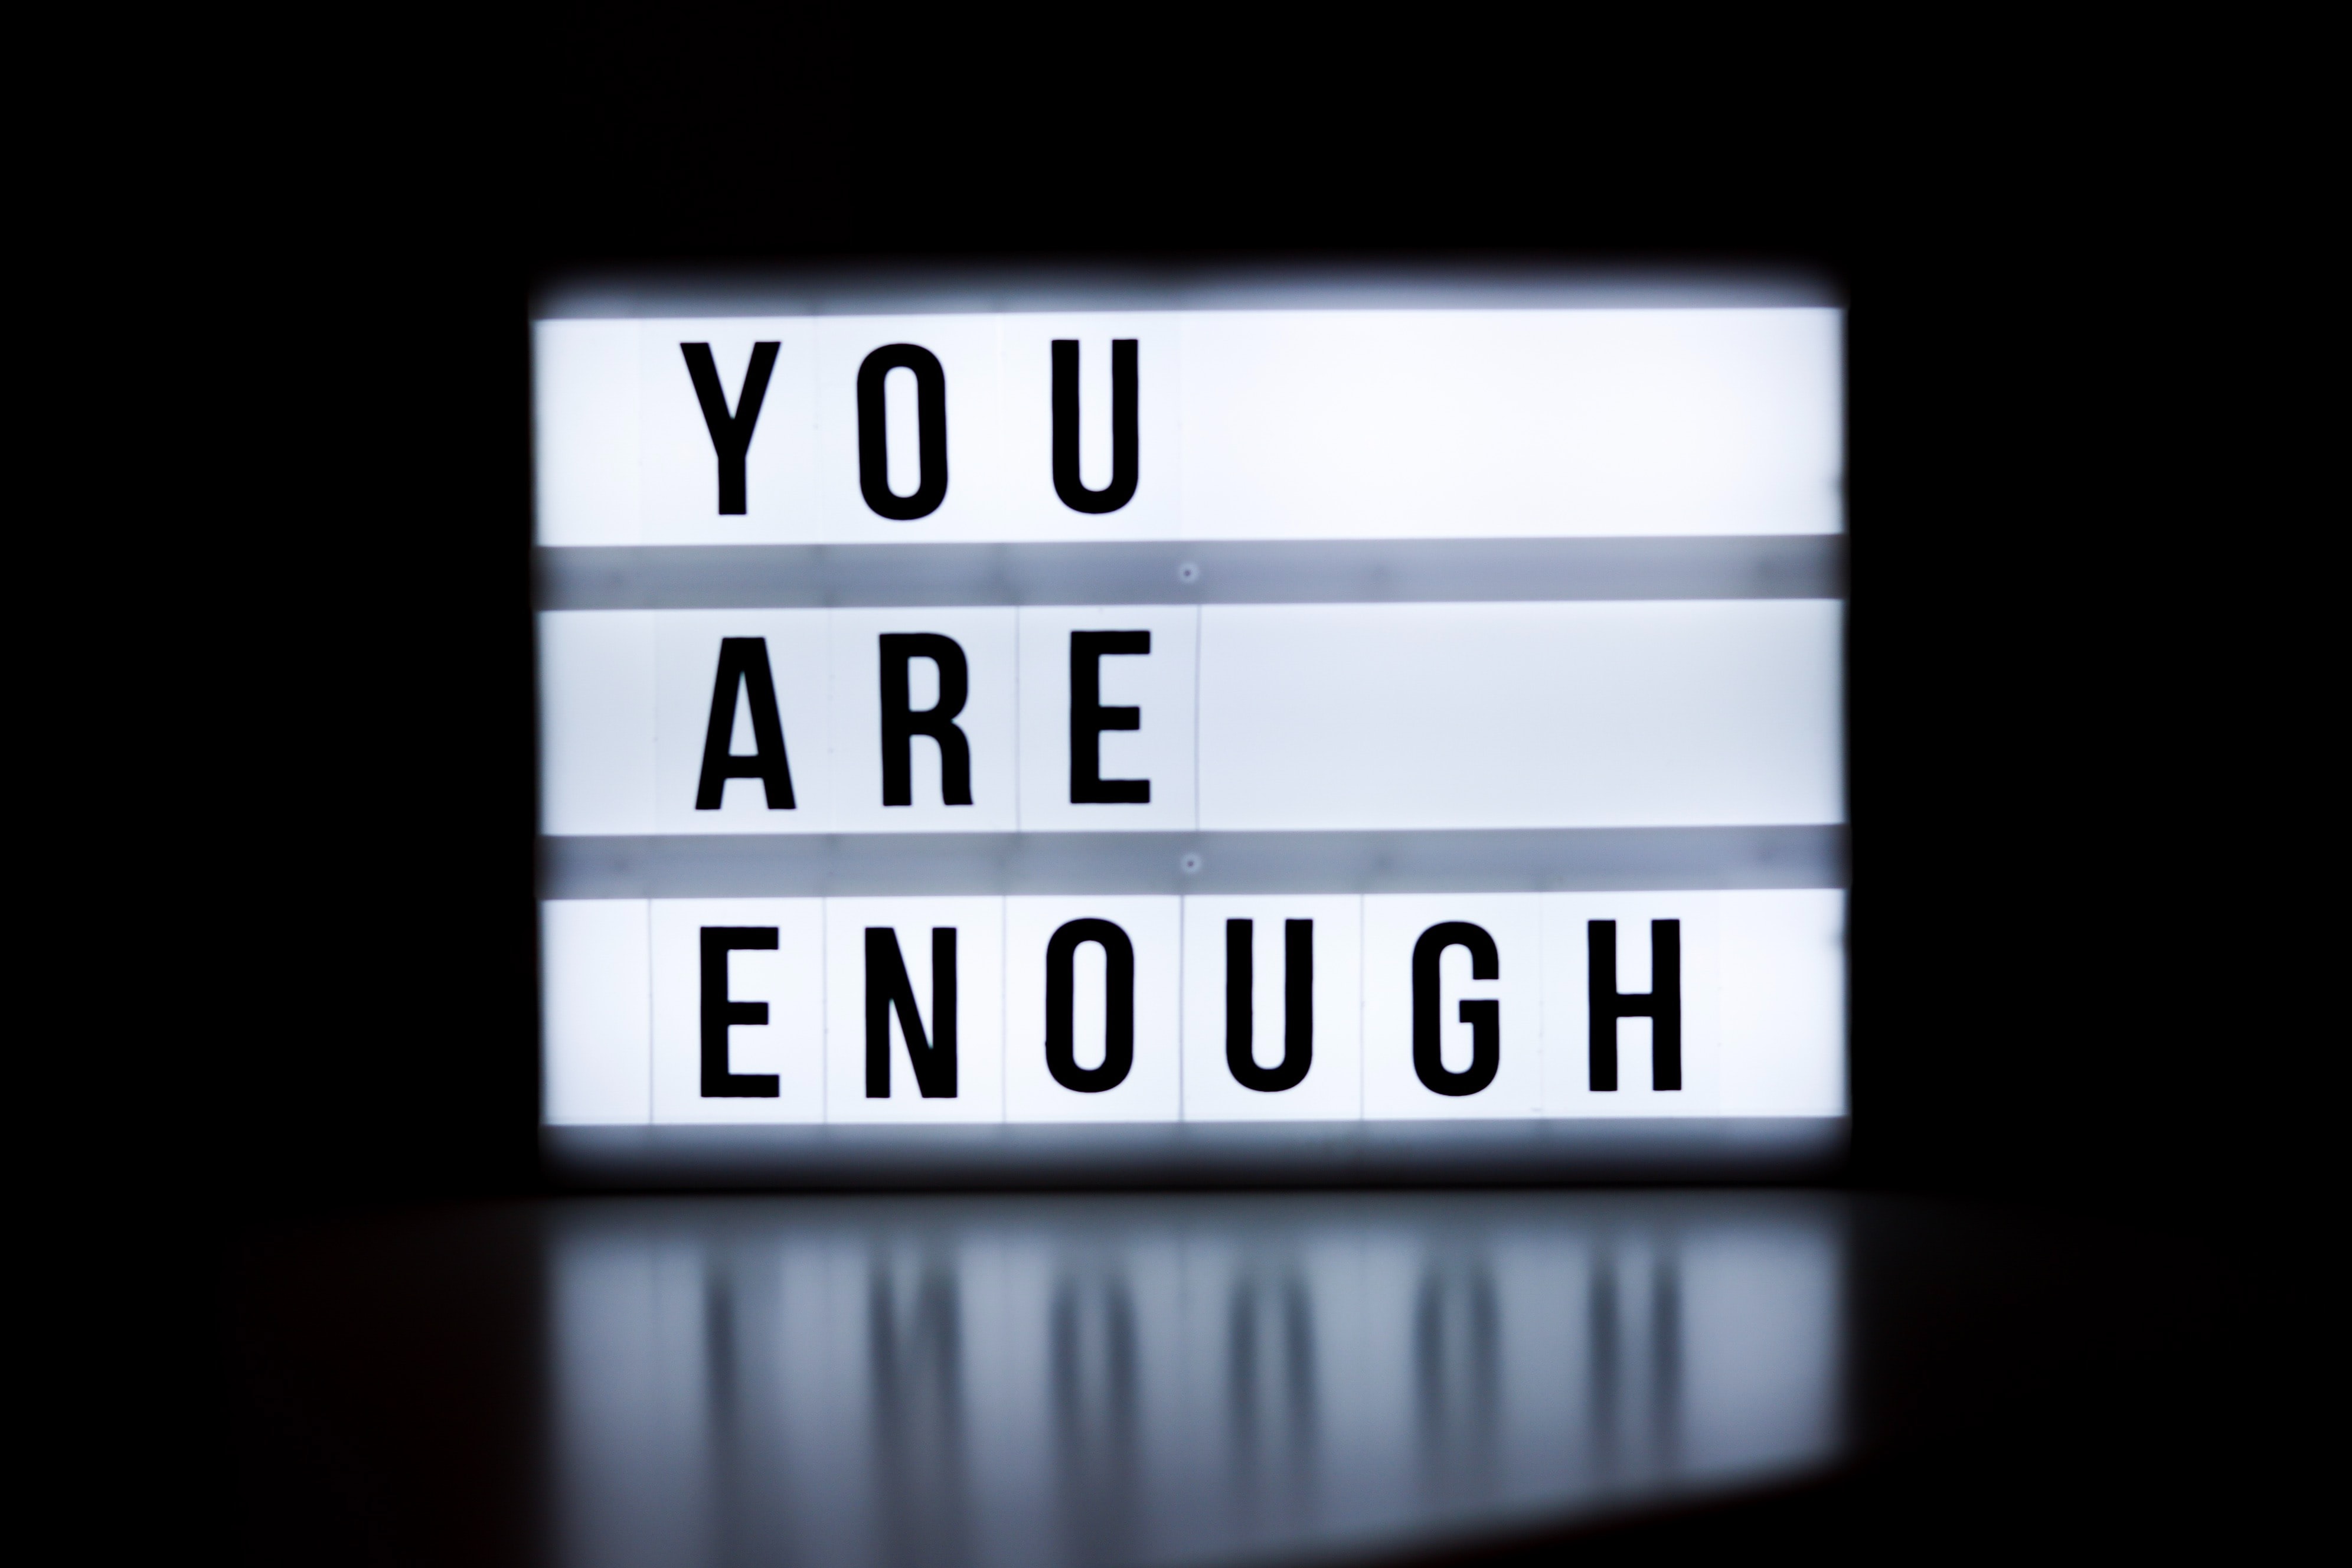 You are Enough by Felicia Buitenwerf